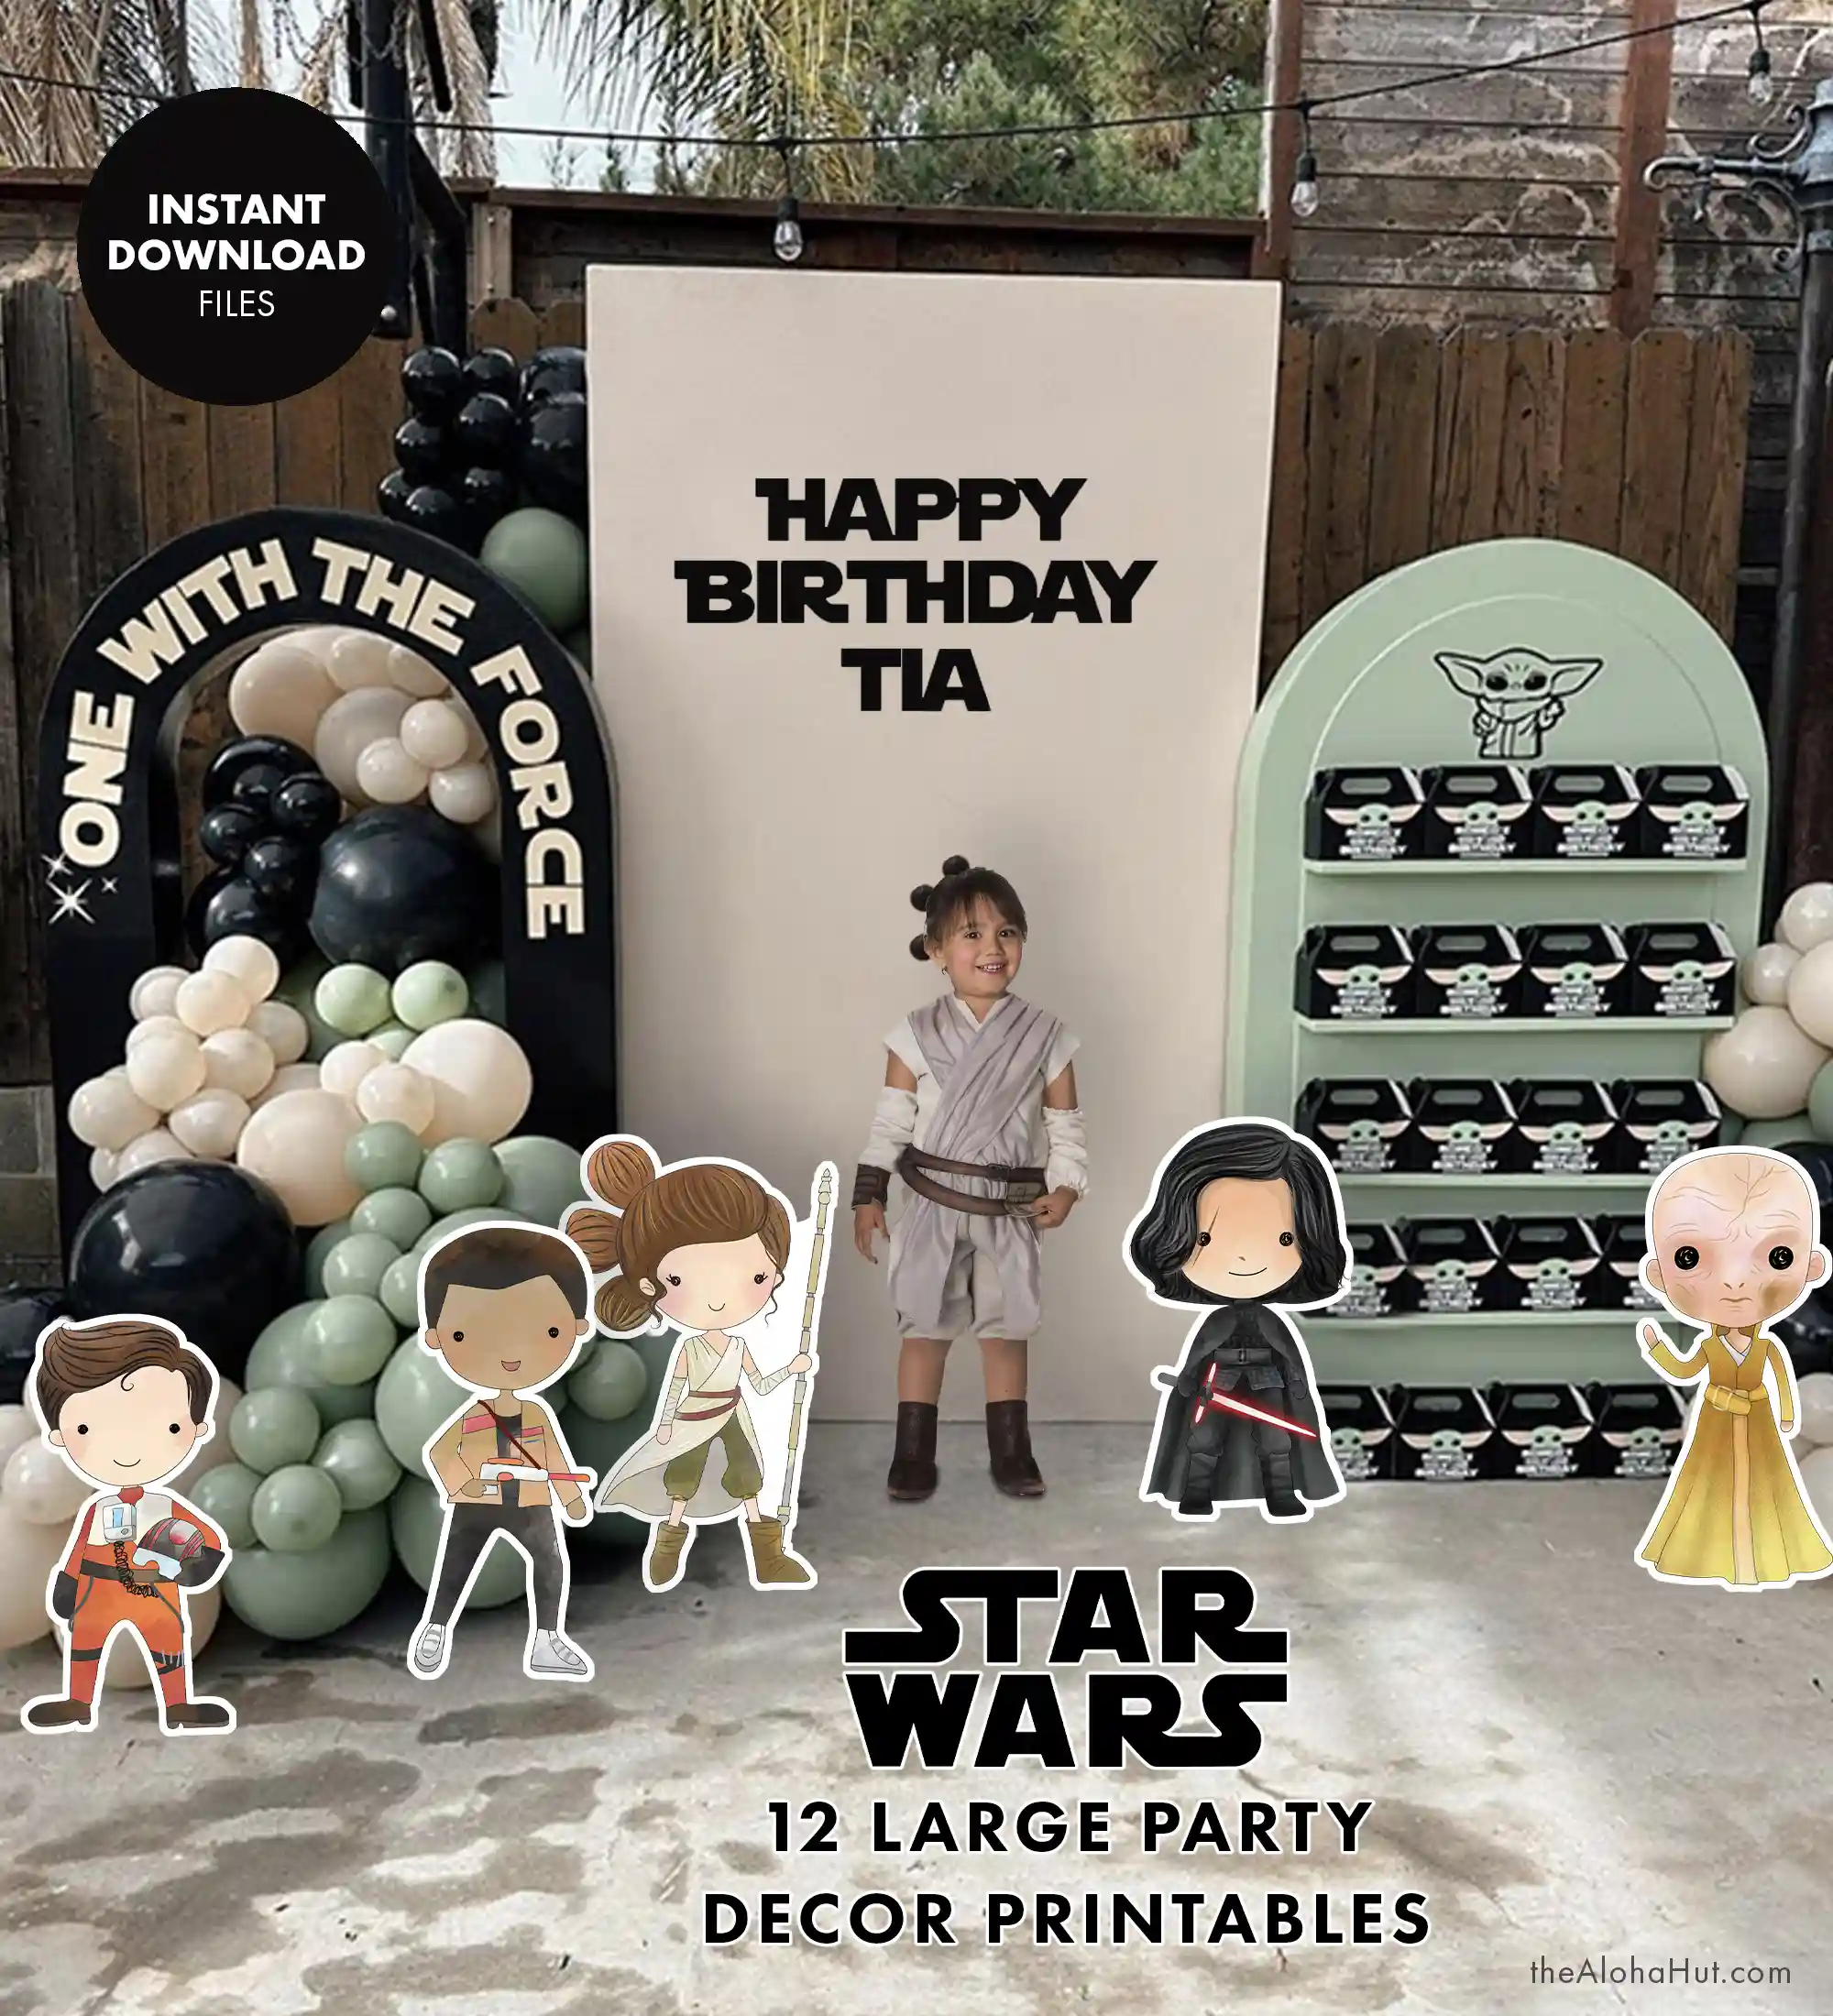 Star Wars party ideas, activities, birthday party games, decorations, and prints. Ideas and tips and tricks for throwing the best Star Wars themed kids birthday party, baby shower, or one with the force celebration. Includes Star Wars printable games, decorations (cupcake toppers, banners, gift tags, characters) and Star Wars party games (BINGO, scavenger hunt, pin the lightsaber on Yoda or Darth Vader). Picture of Star Wars character cutouts from The Force Awakens: Poe, Finn, Holod, Rey, Kylo Ren, Maz, BB8, Leia, Luke, etc. 12 characters total.